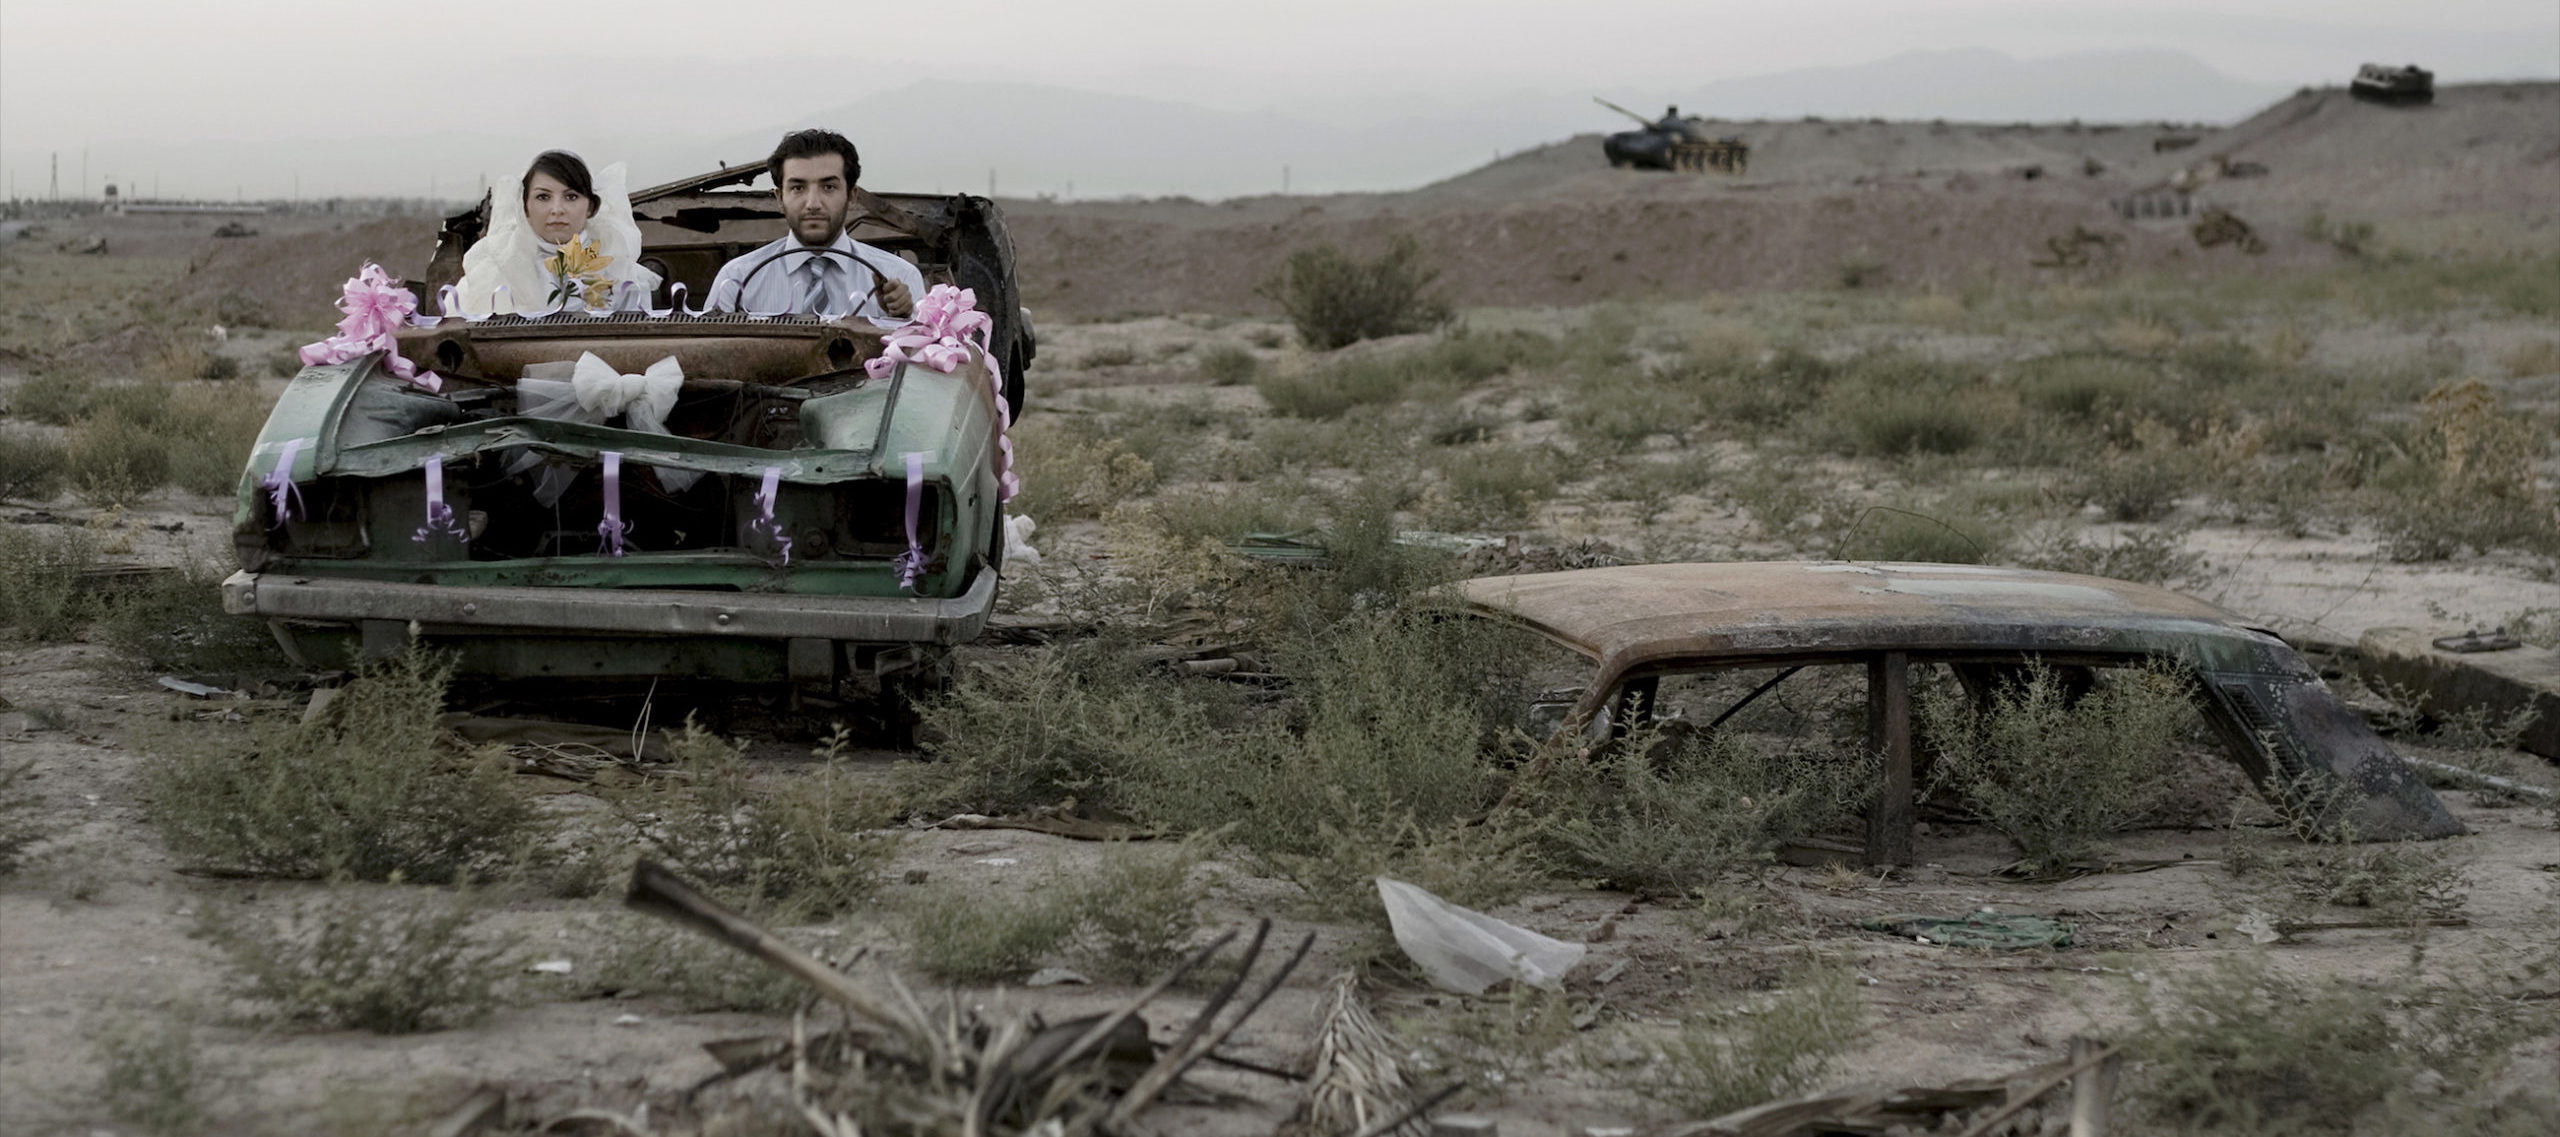 A couple sitting in a burned-out car in wedding finery, they look directly at the camera with neutral or stricken expressions.